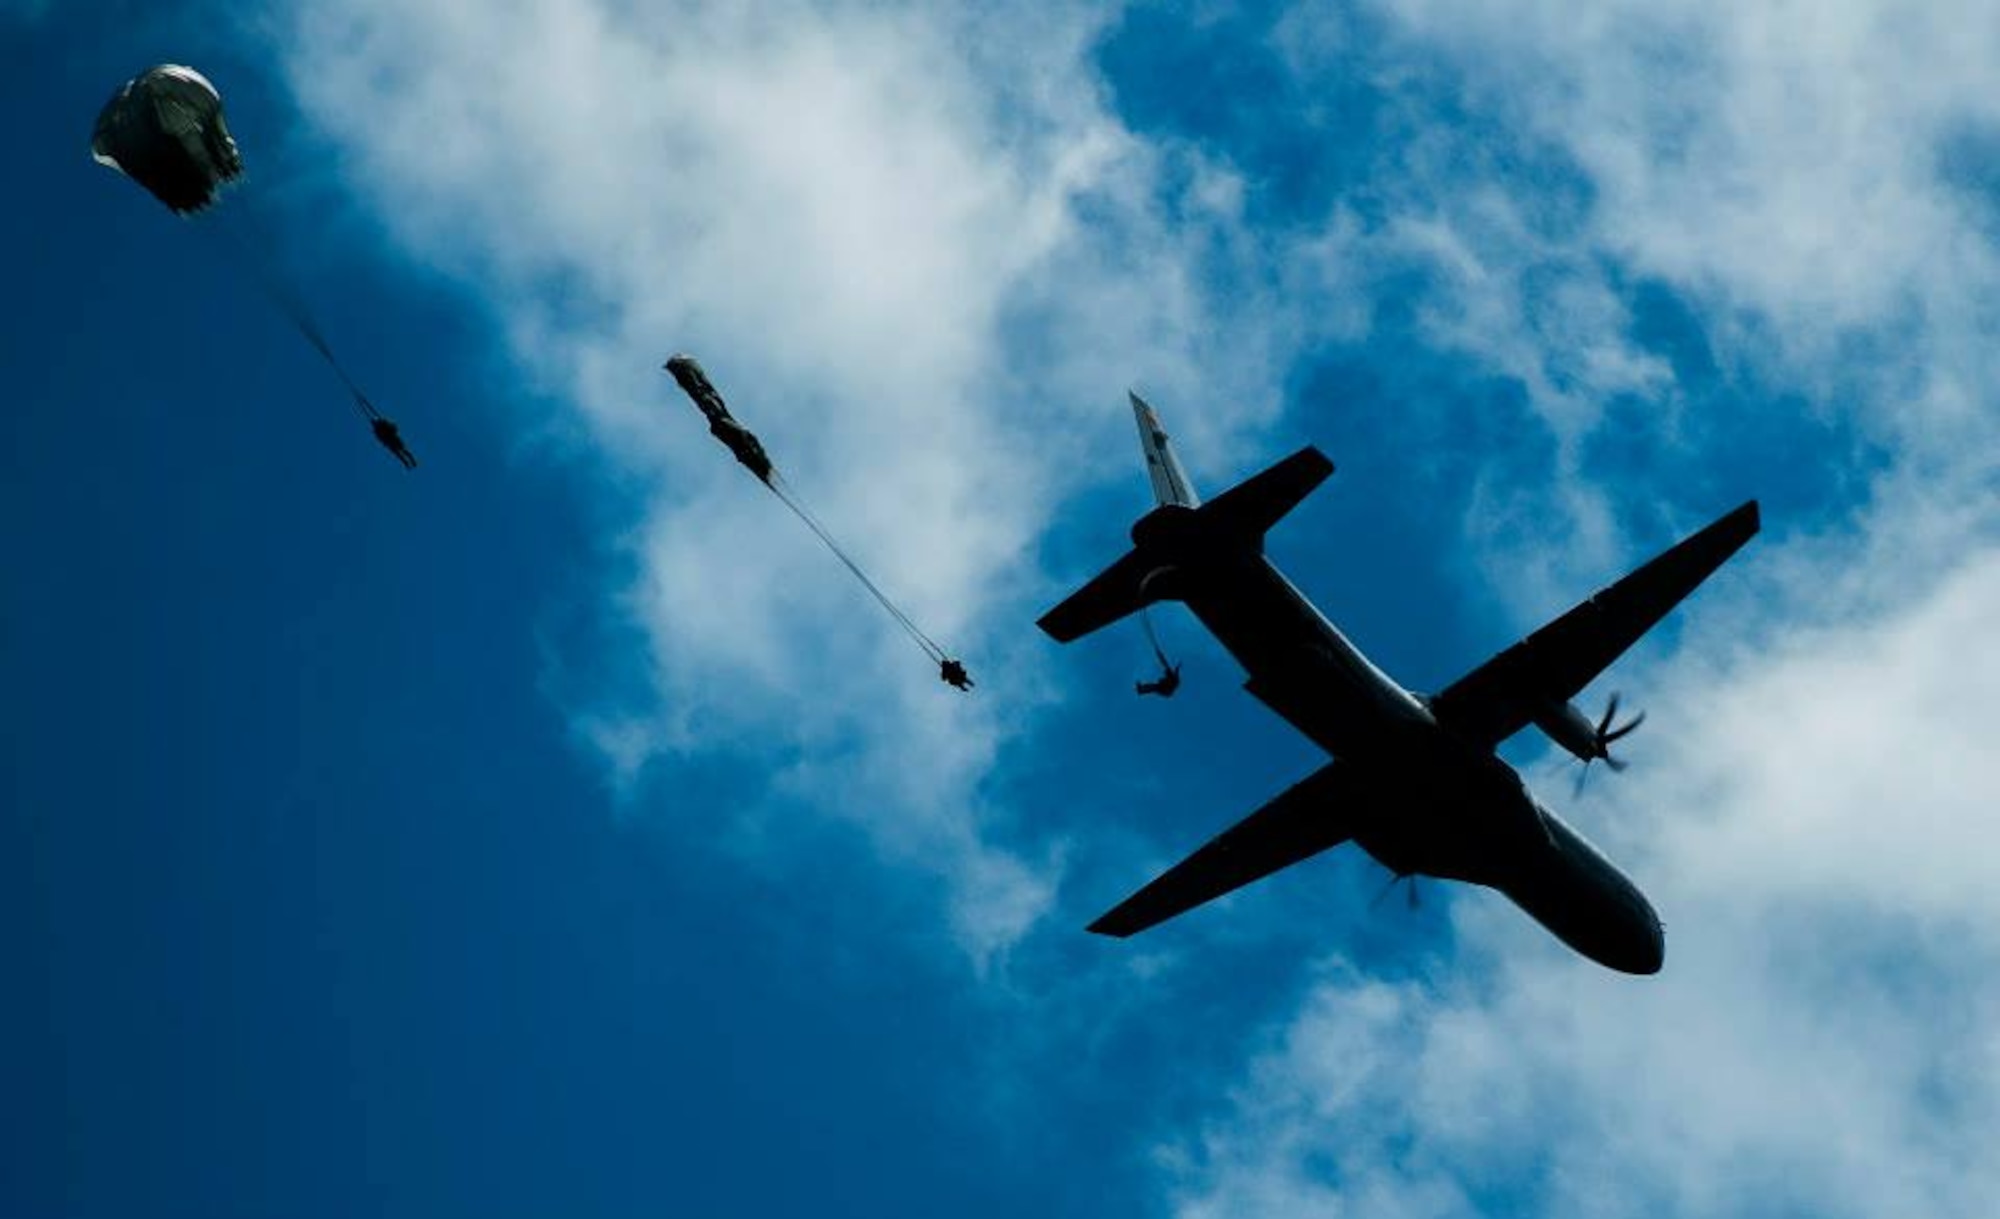 Five Colombia Air Force airmen parachute from a Colombian Air Force Casa 295 aircraft attempting to land as close to target during the first air drop with United States Air Force personnel aboard on March 3, 2015 at Marandua Air Force Base in Colombia, South America. (Photo by U.S. Air Force Tech. Sgt. Matthew Hannen)